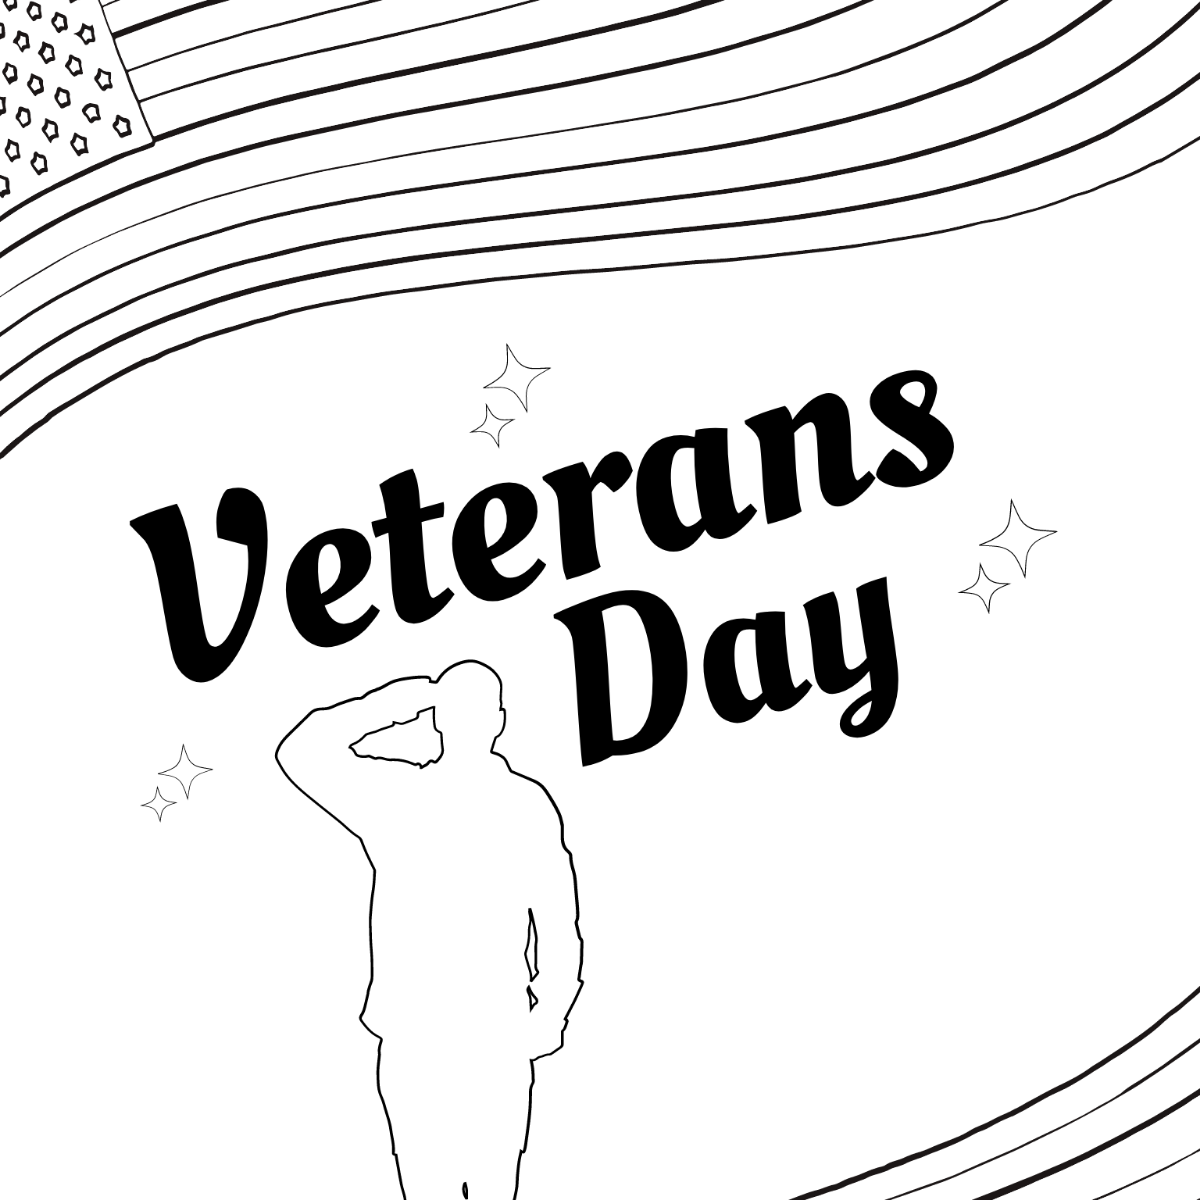 Free veterans day drawing s examples